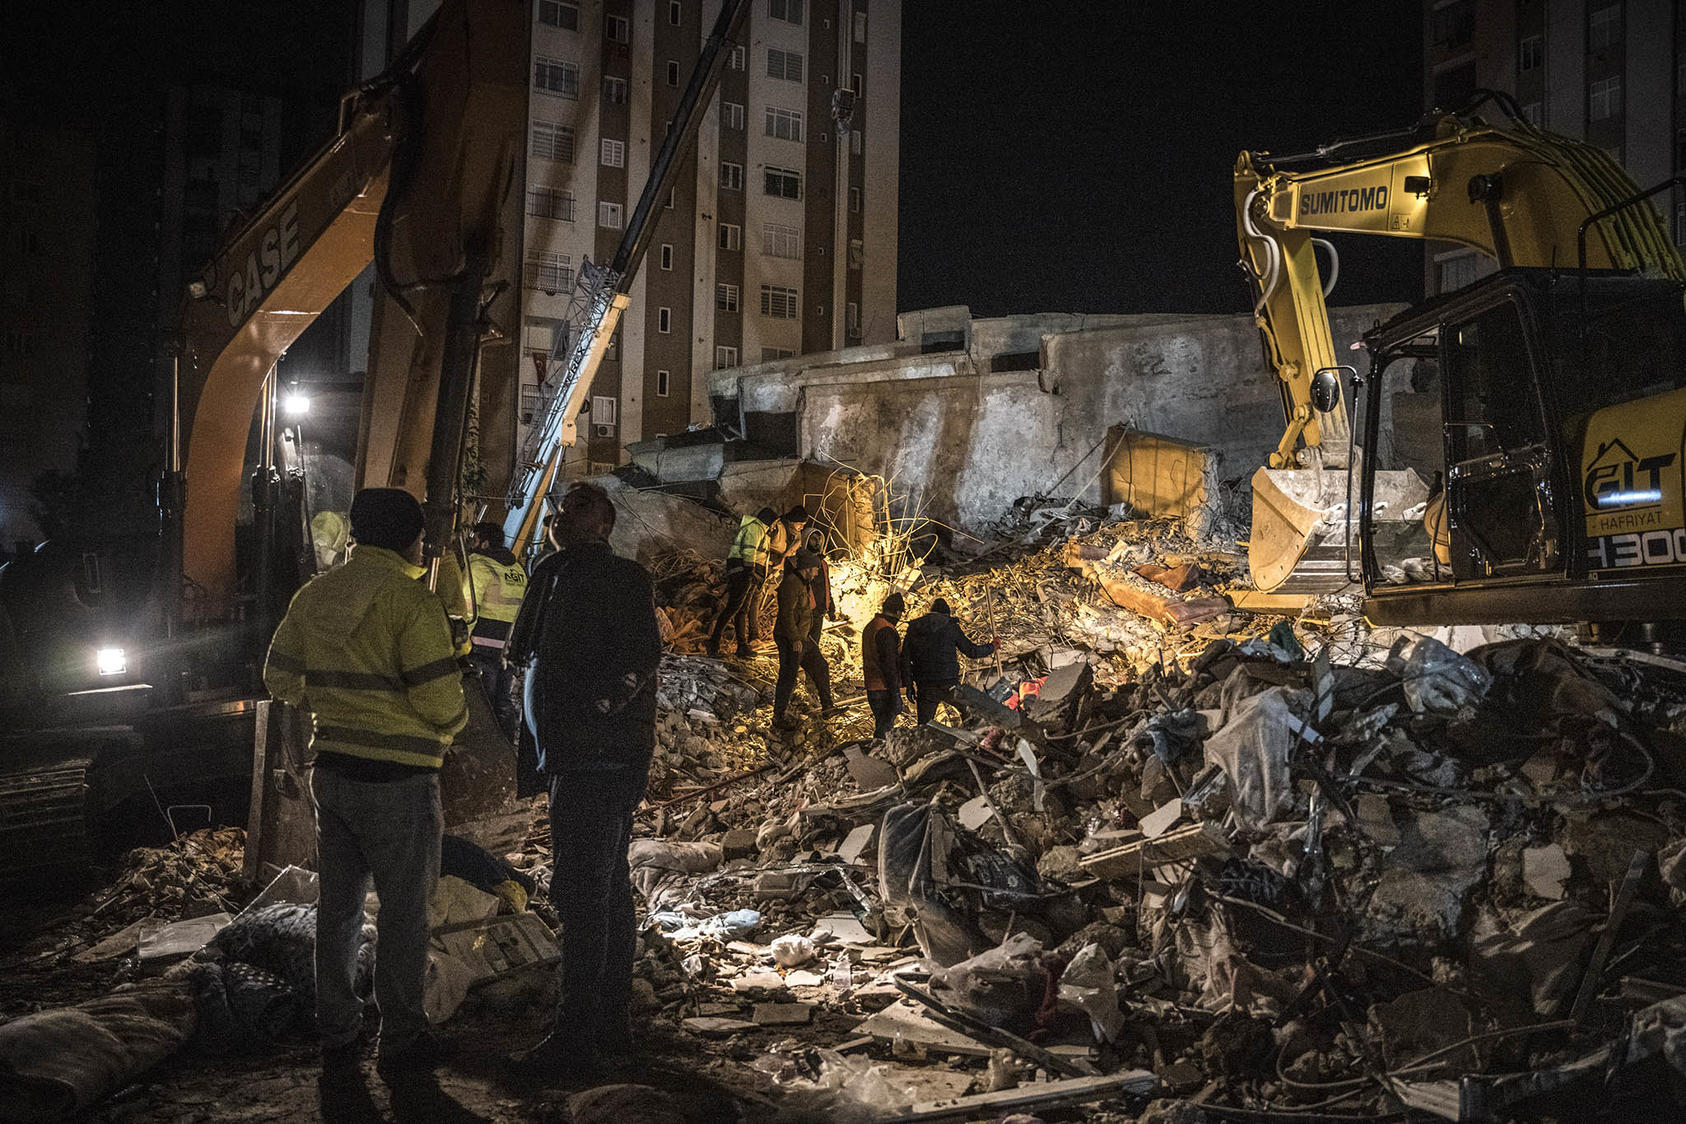 Emergency personnel during a search and rescue operation at the site of a collapsed building after an earthquake in Adana, Turkey, on Feb. 7, 2023. (Sergey Ponomarev/The New York Times)